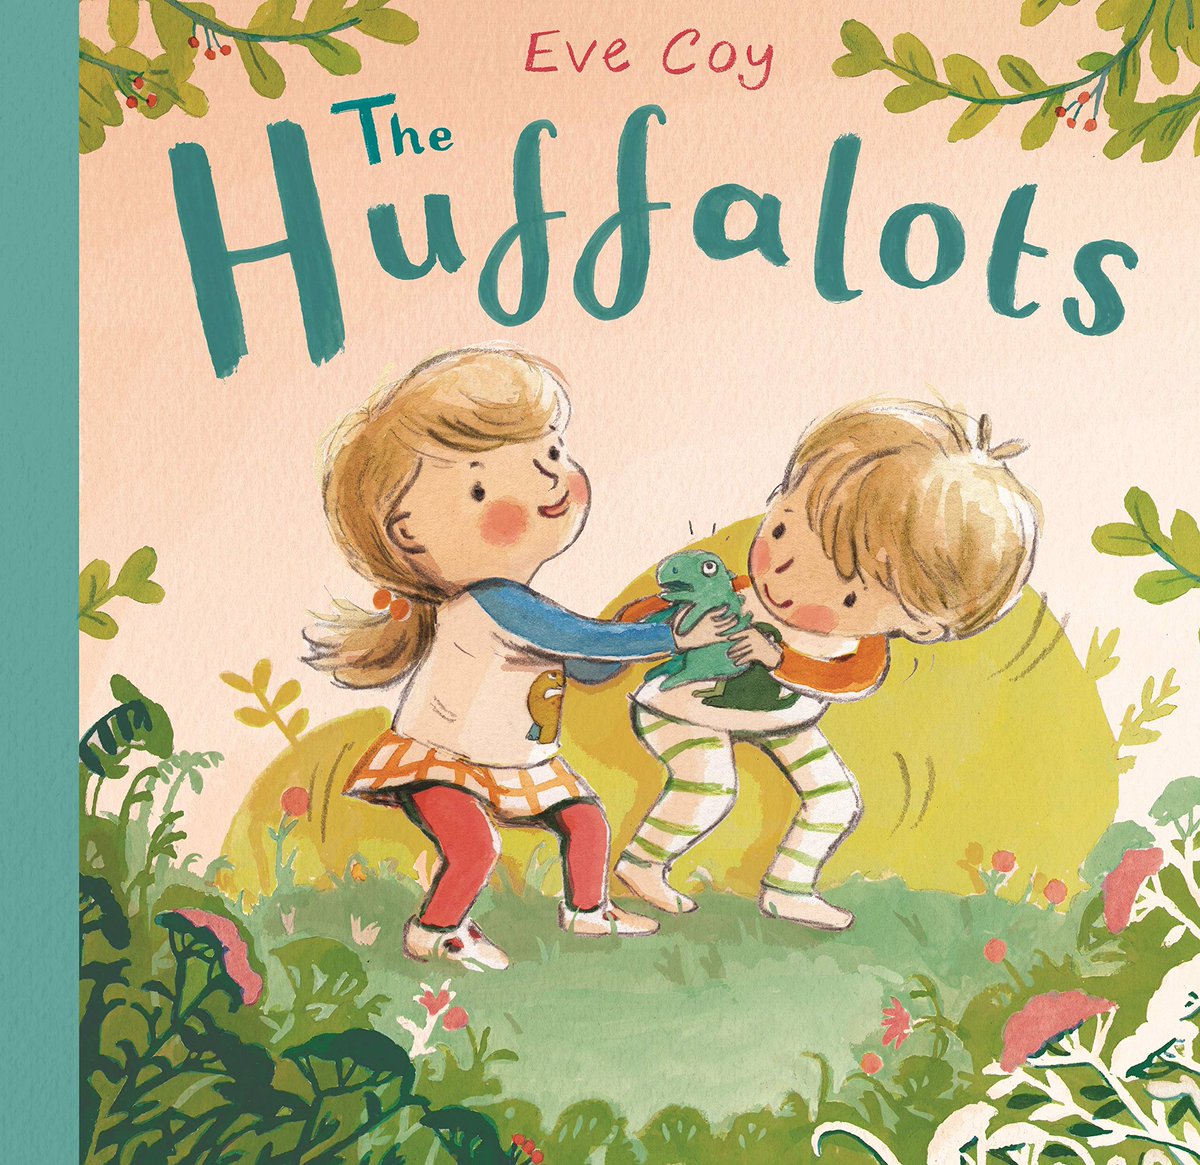 “The Huffalots” by  @evescoy, published by  @AndersenPress  #SouthWestSuggests  #ckg21pick